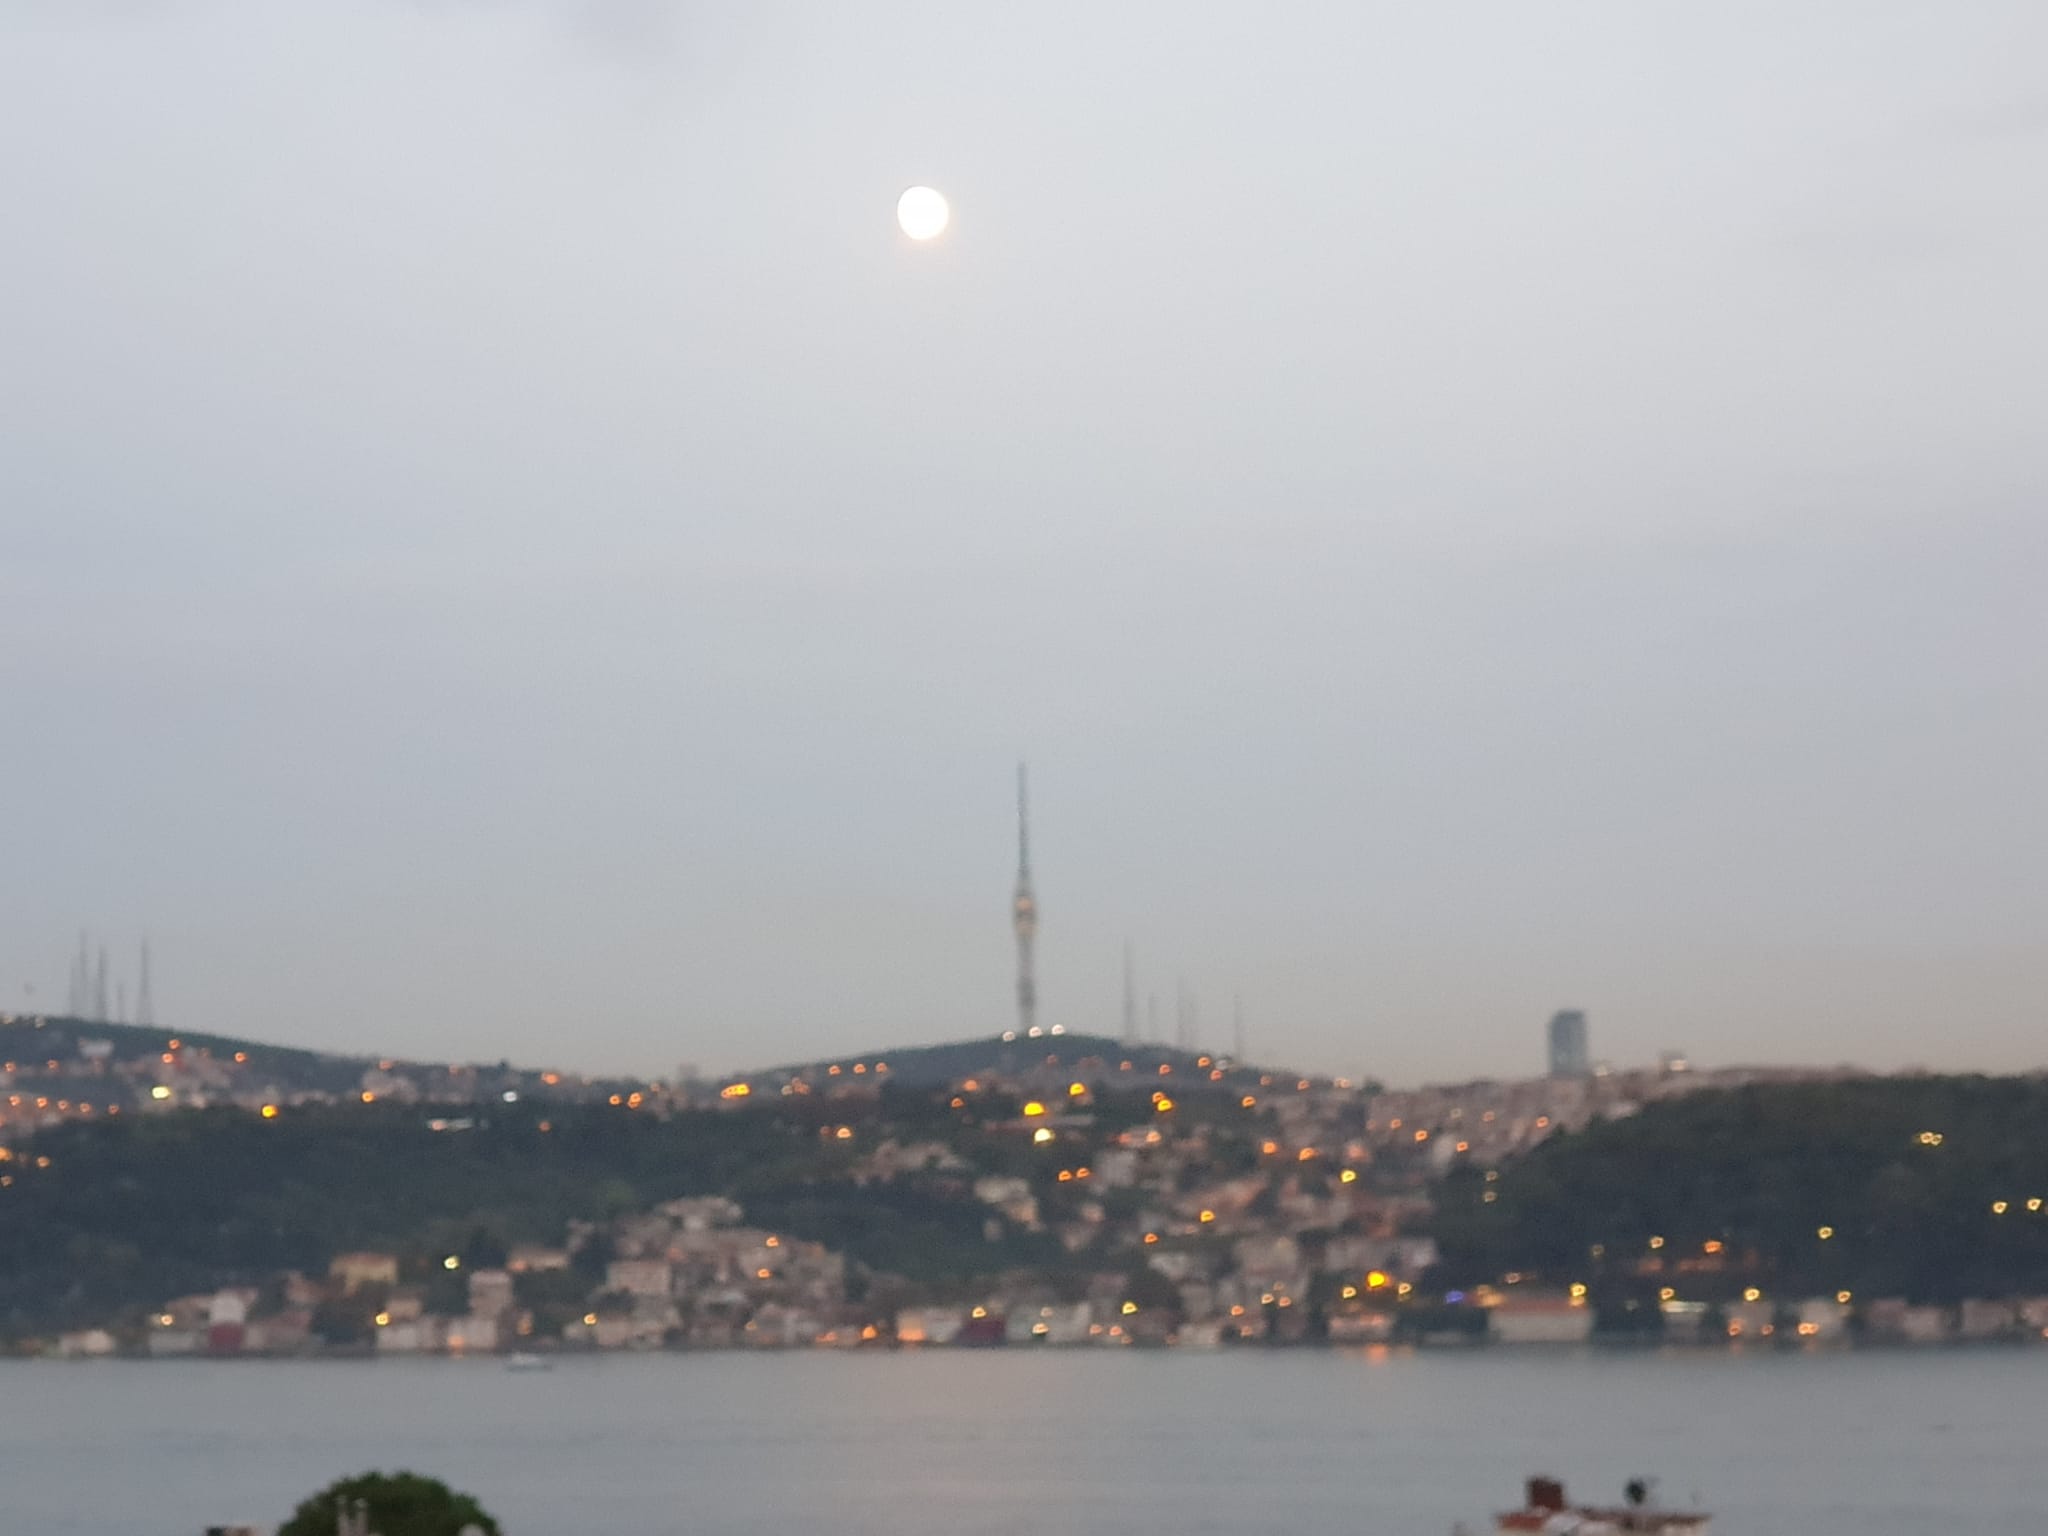 For Sale With Stunning Bosphorus Panoramic View